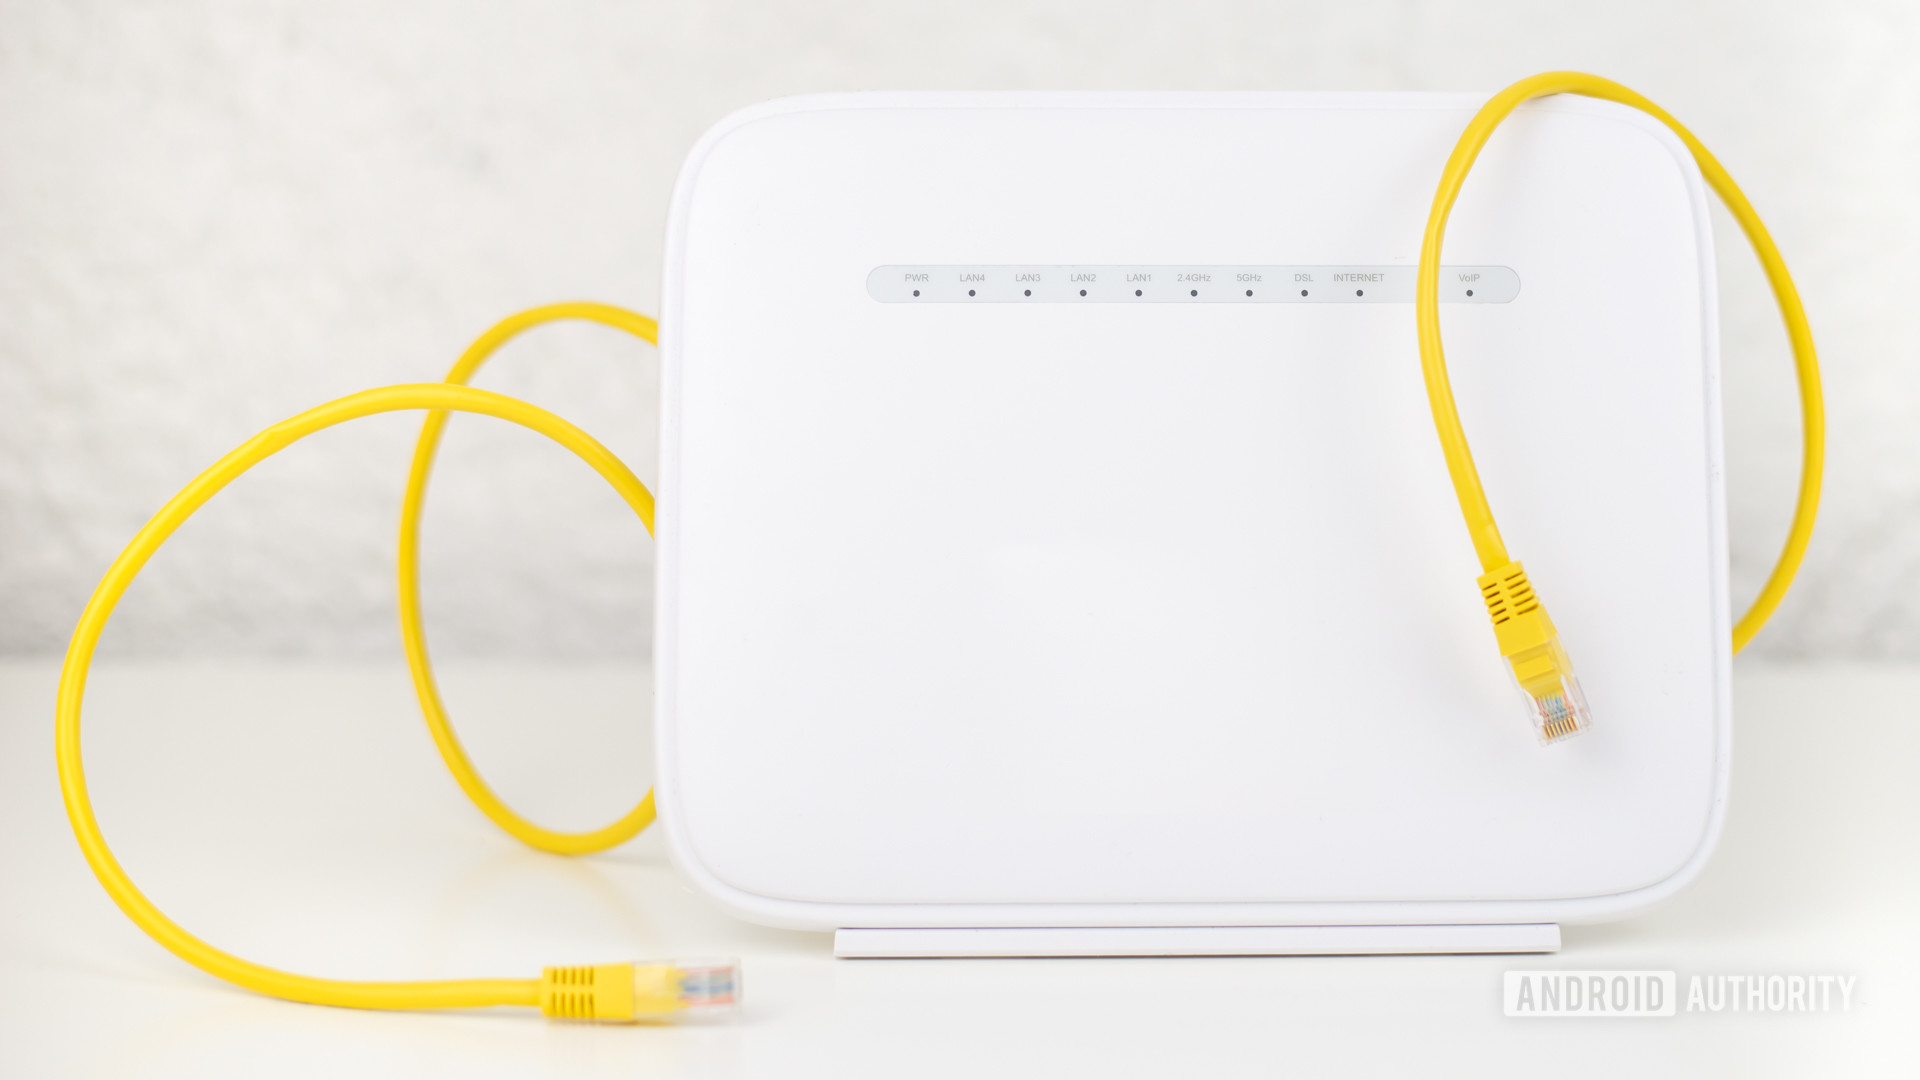 Ensure you have a stable and reliable internet connection.
If using Wi-Fi, move closer to the router or consider using a wired connection.